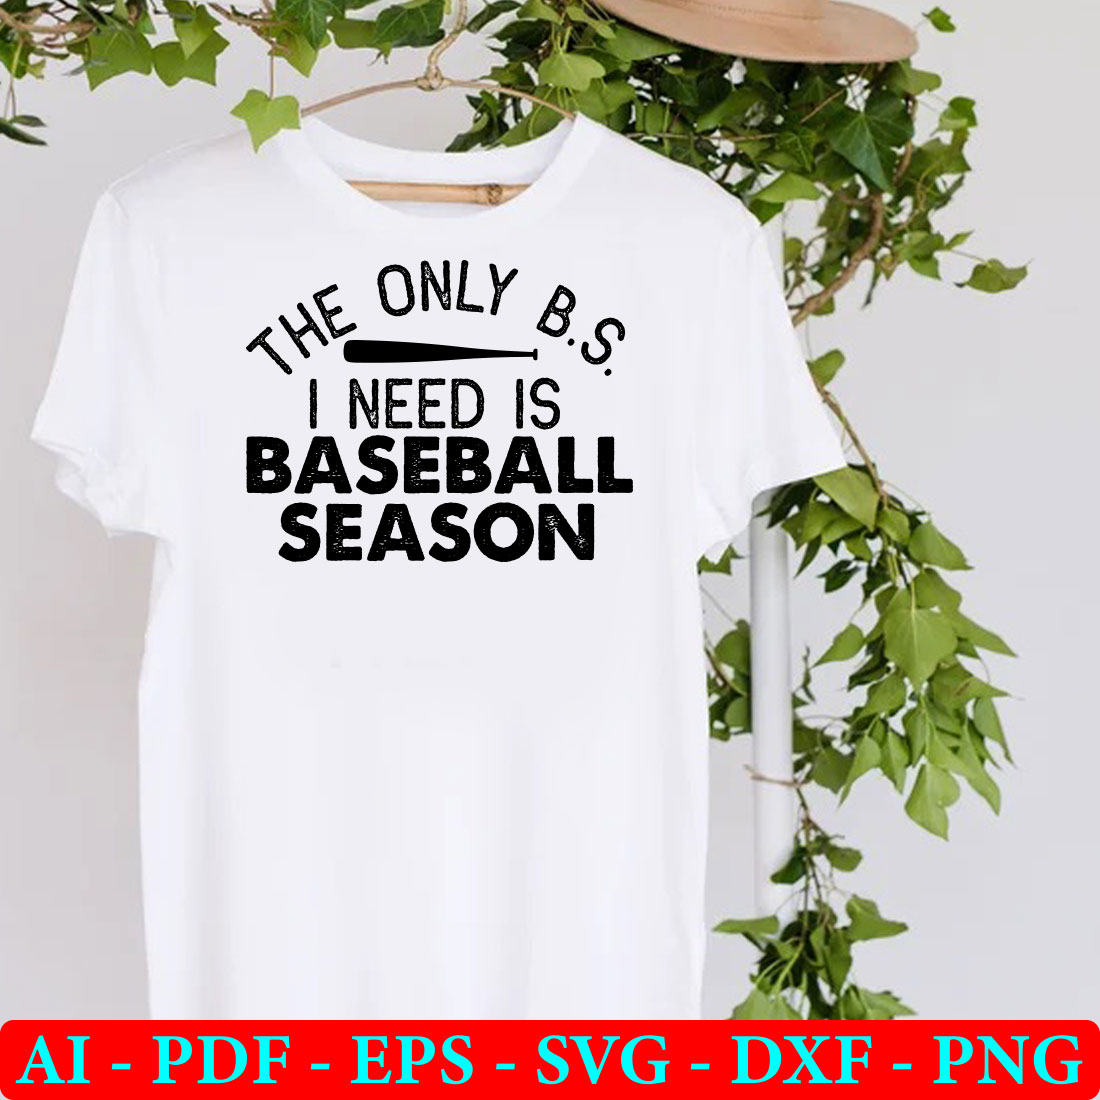 T - shirt that says the only b s i need is baseball season.